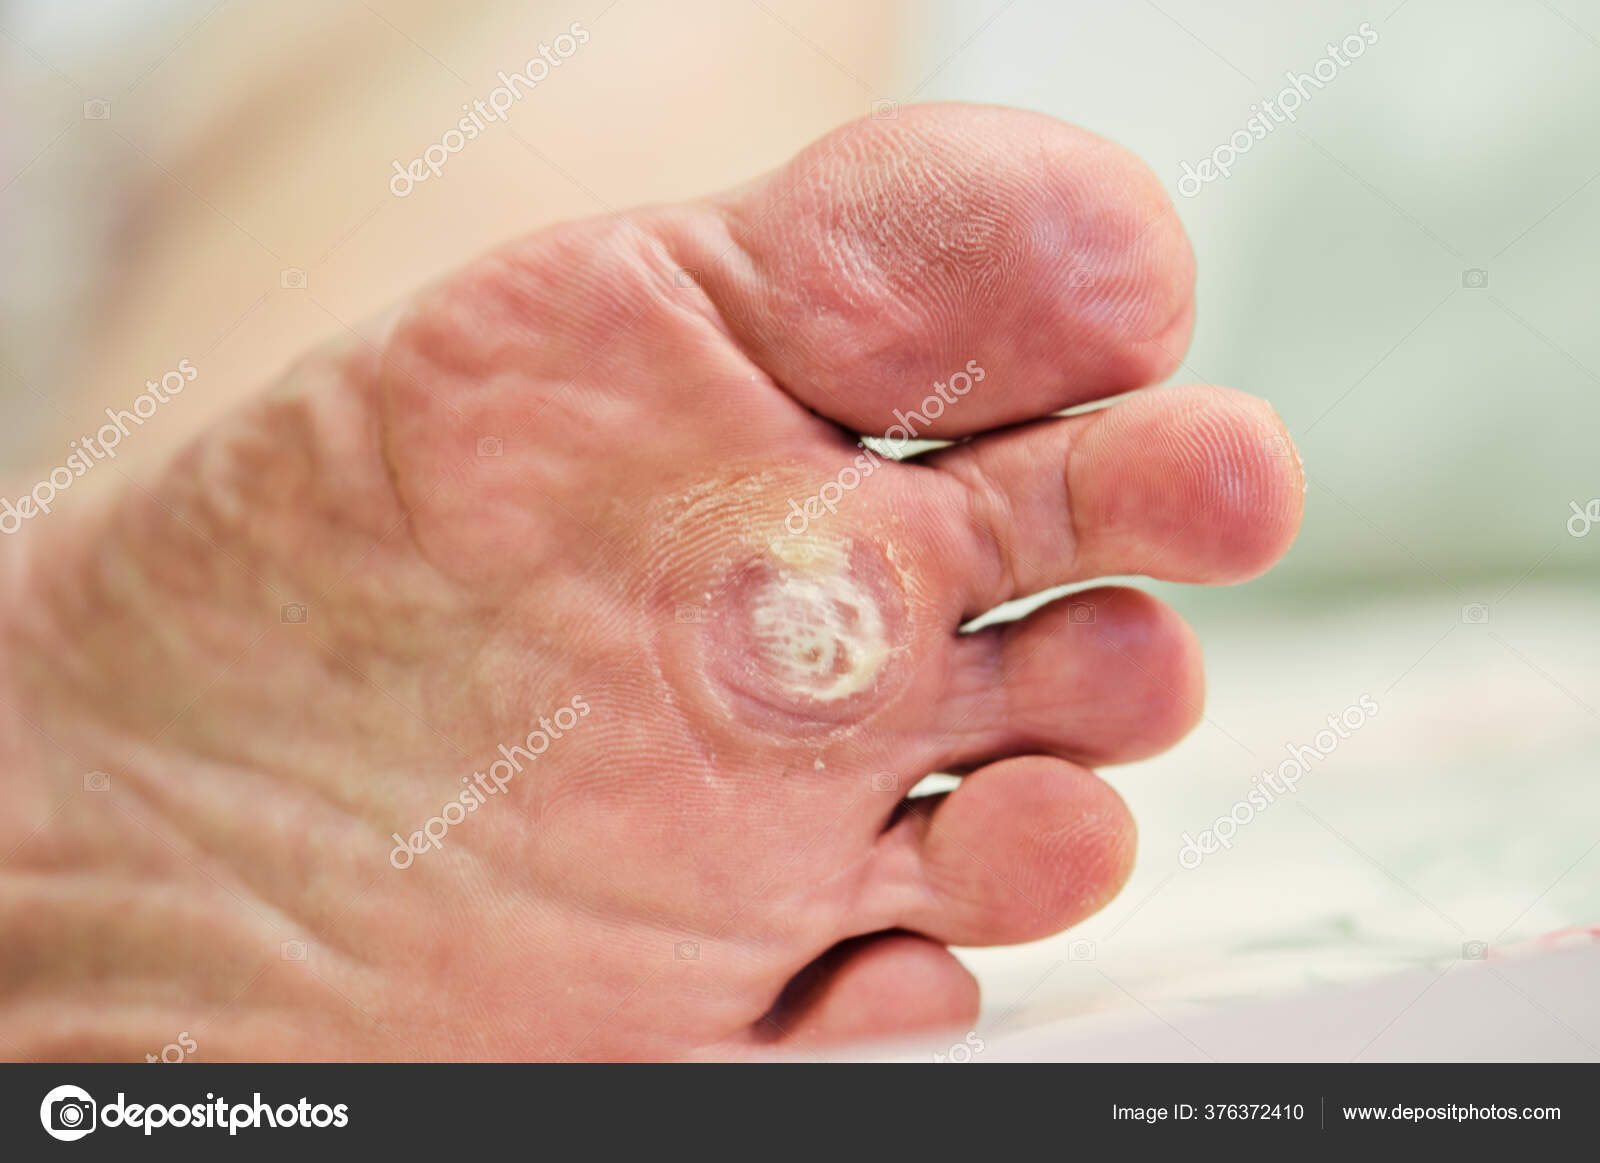 Wart Foot Can Treatment Salicylic Acid Wart Can Treat Treatment Stock Photo By C Tpap28 Gmail Com